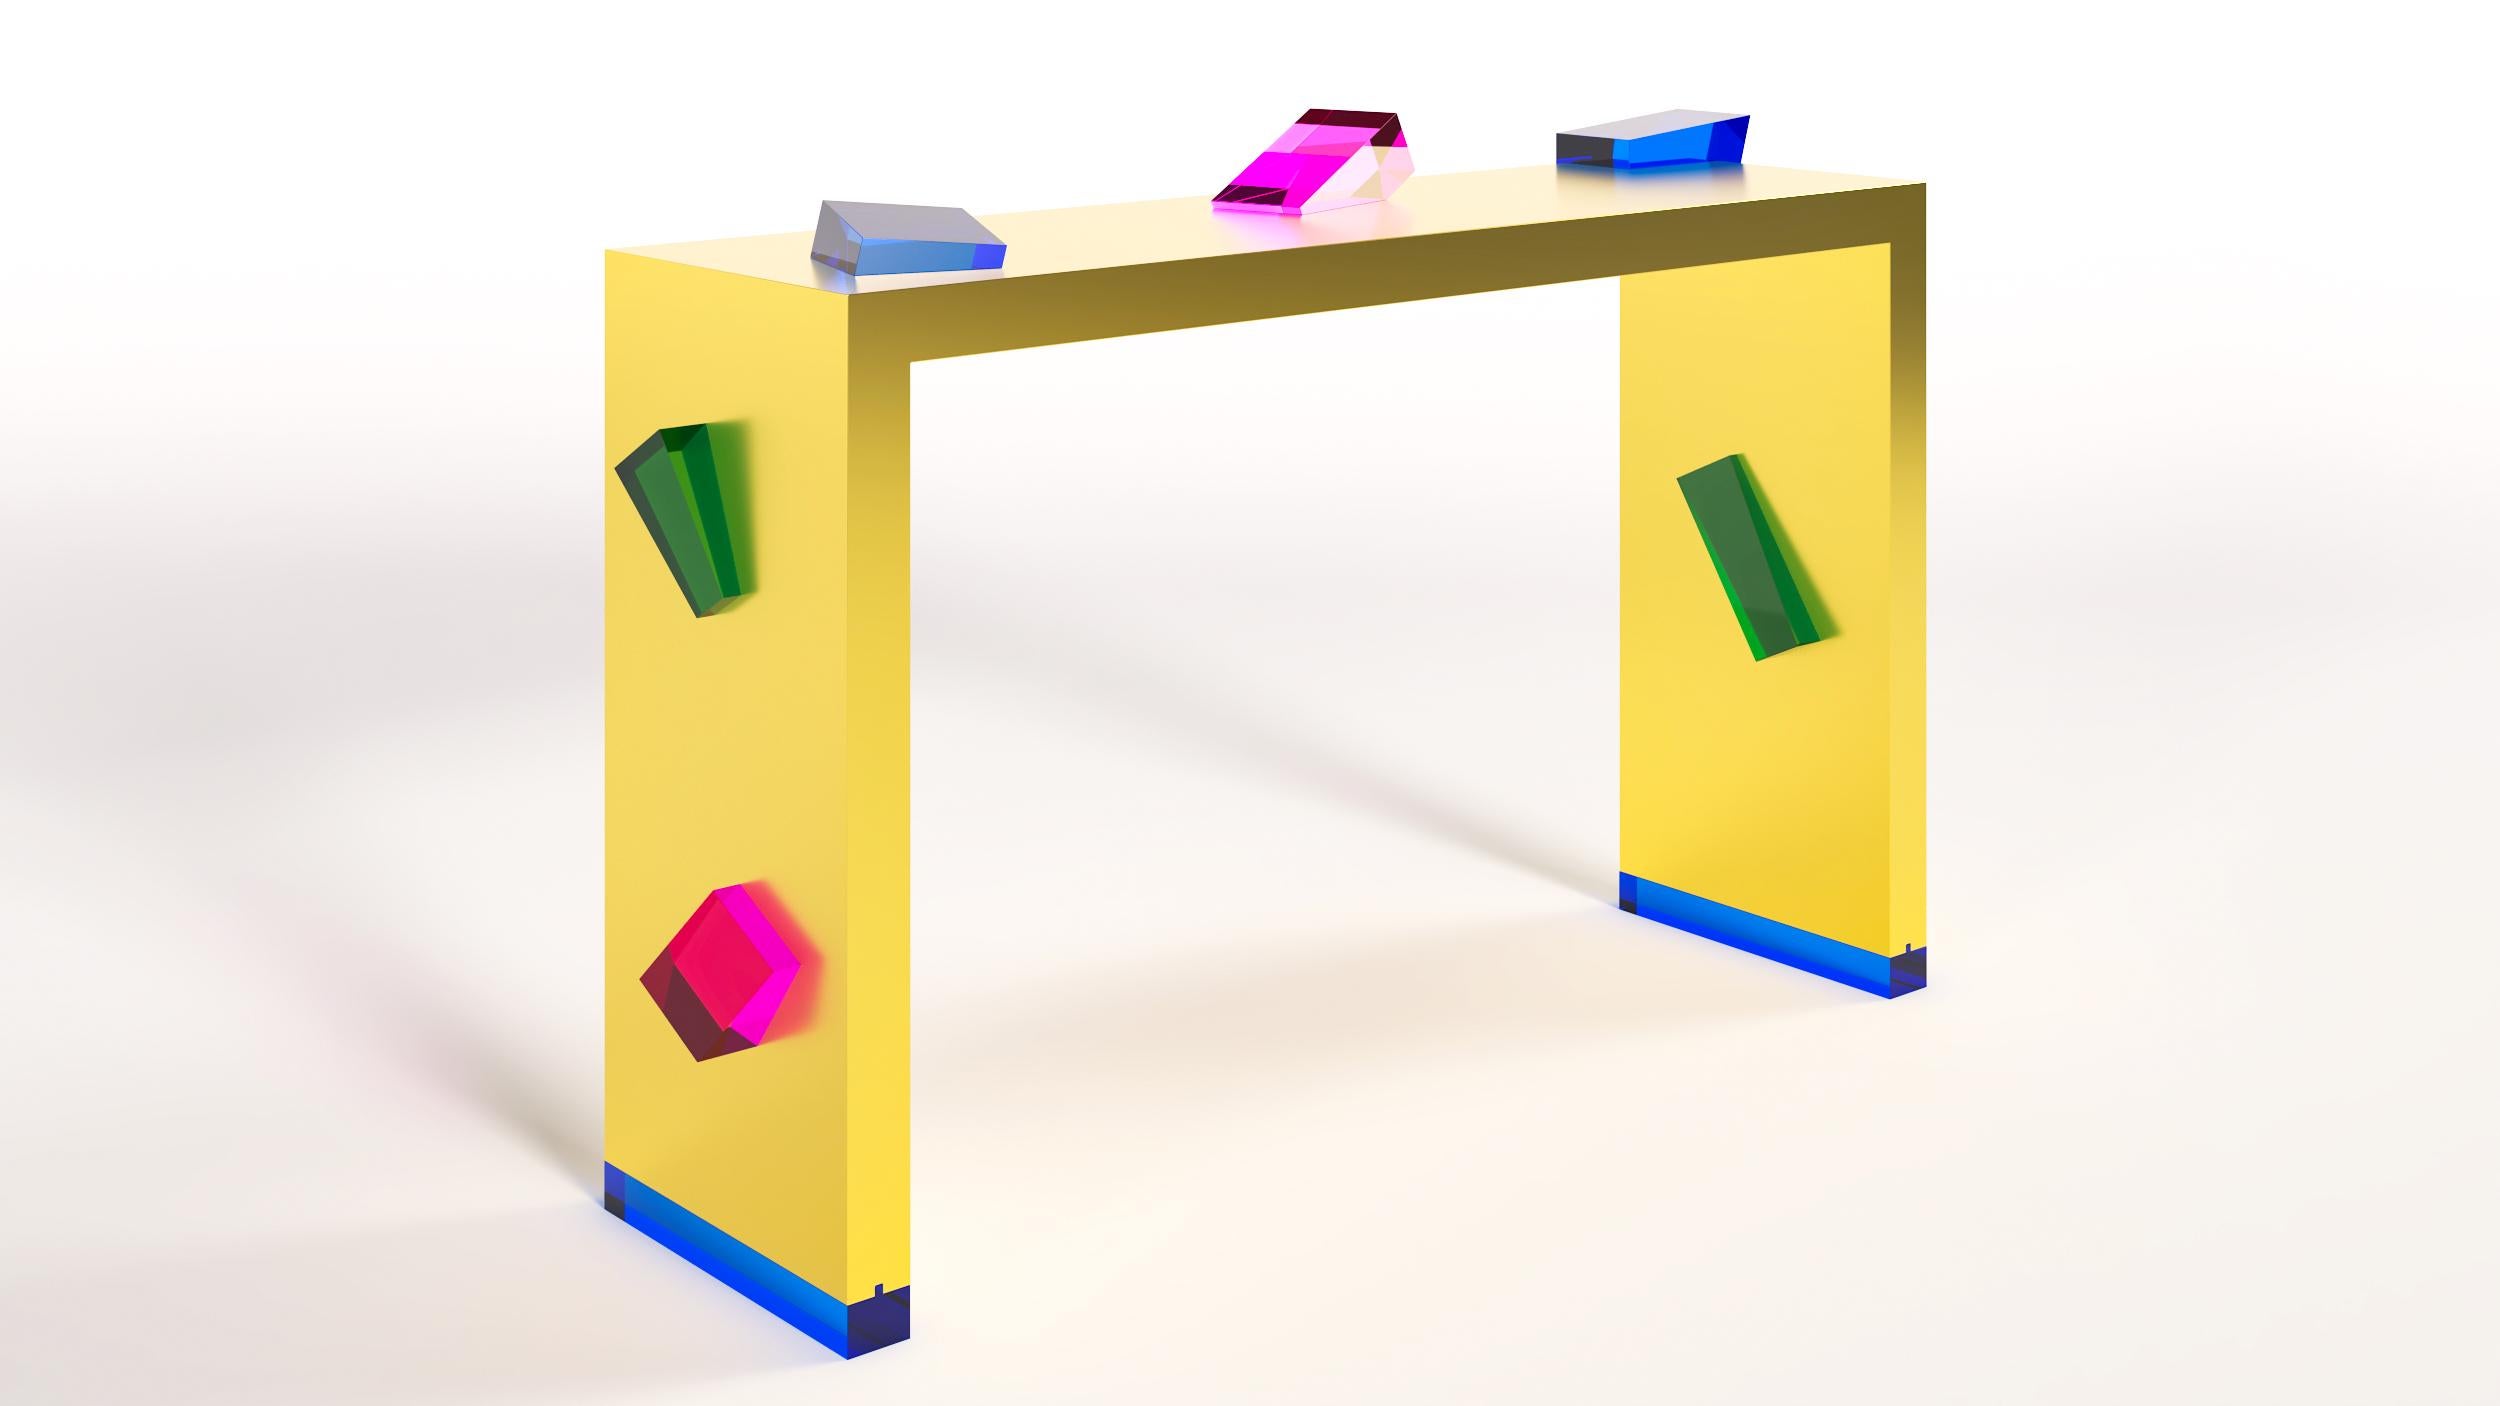 Future Pyrite console table handmade with brass structure and colored plexiglass inserts. The console is designed by Studio Superego for Superego Editions.

Biography
Superego editions was born in 2006, performing a constant activity of research in